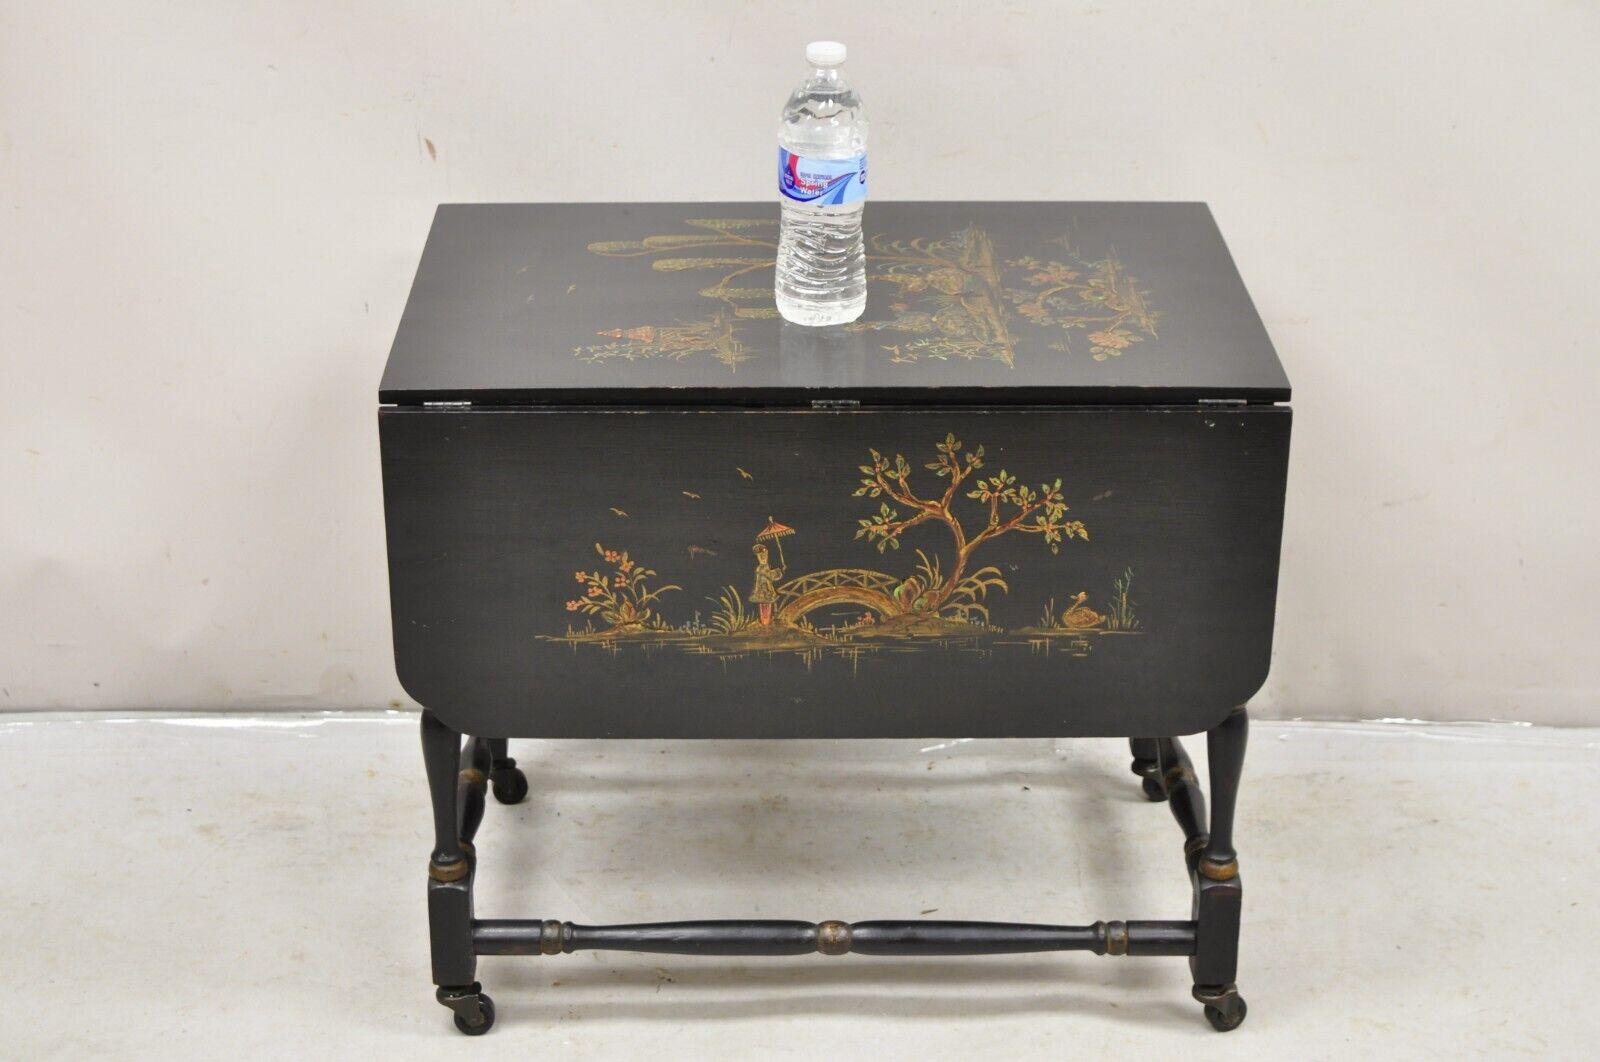 Antique Chinoiserie Asian Painted Small Black Dropleaf Side Table on Rolling Casters. Circa  Early 20th Century. Measurements: 21